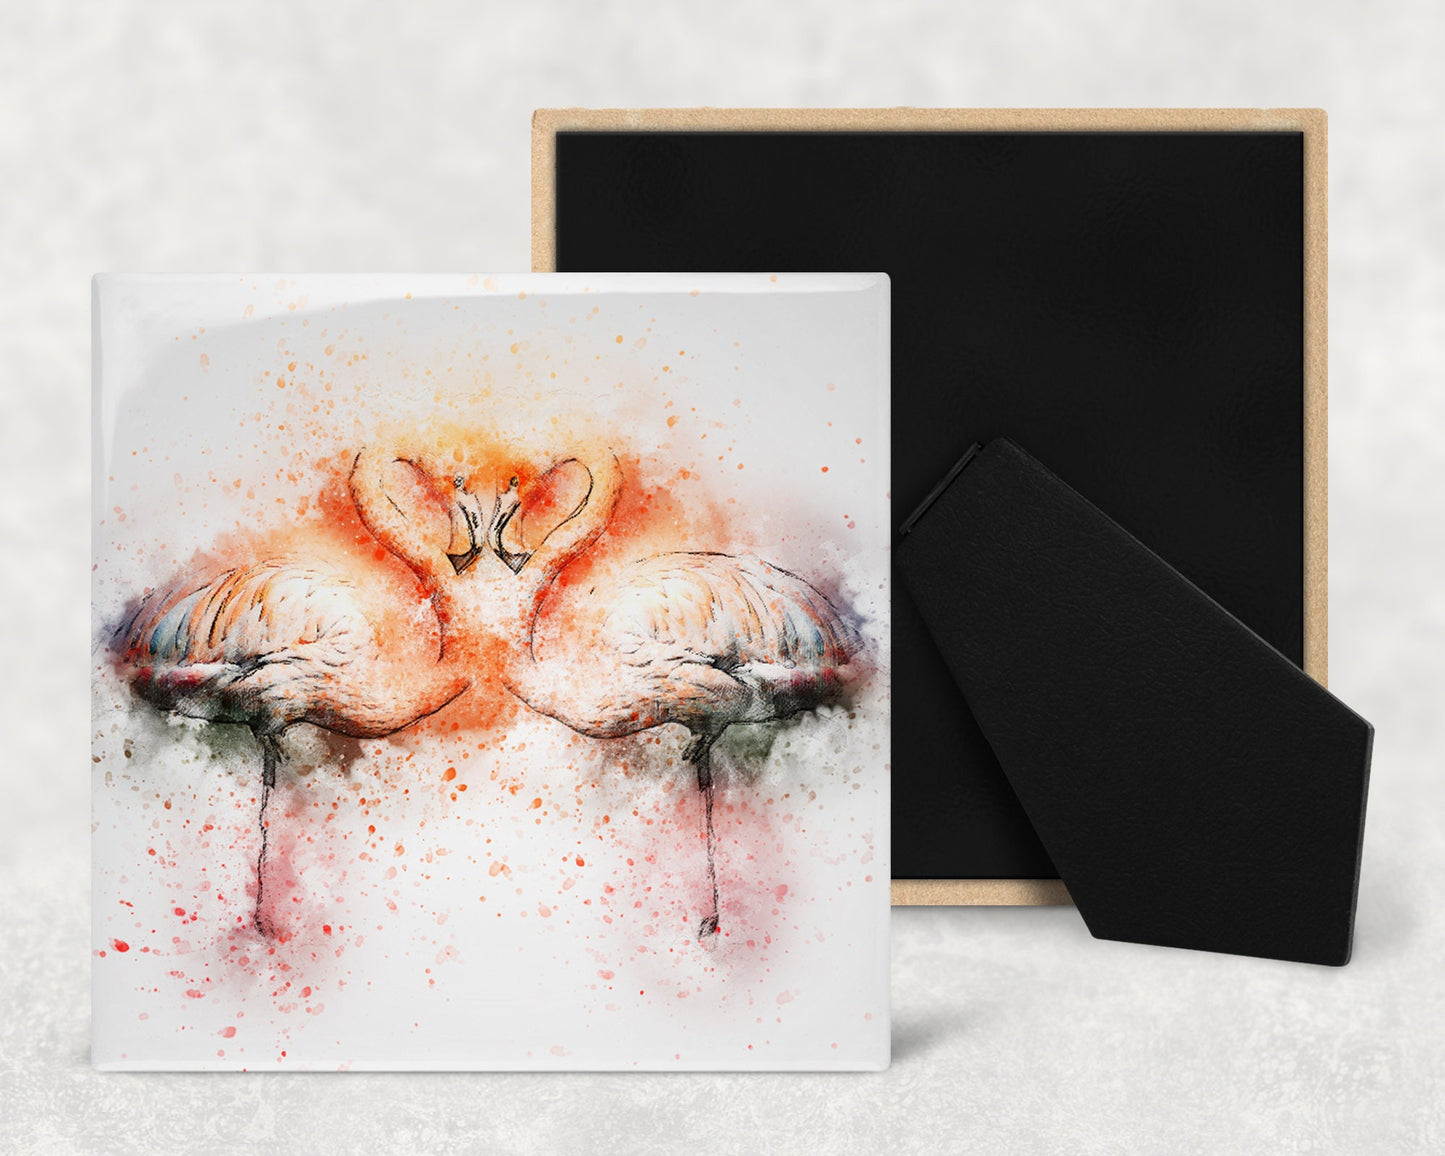 Watercolor Flamingos Art Decorative Ceramic Tile with Optional Easel Back - Available in 3 Sizes